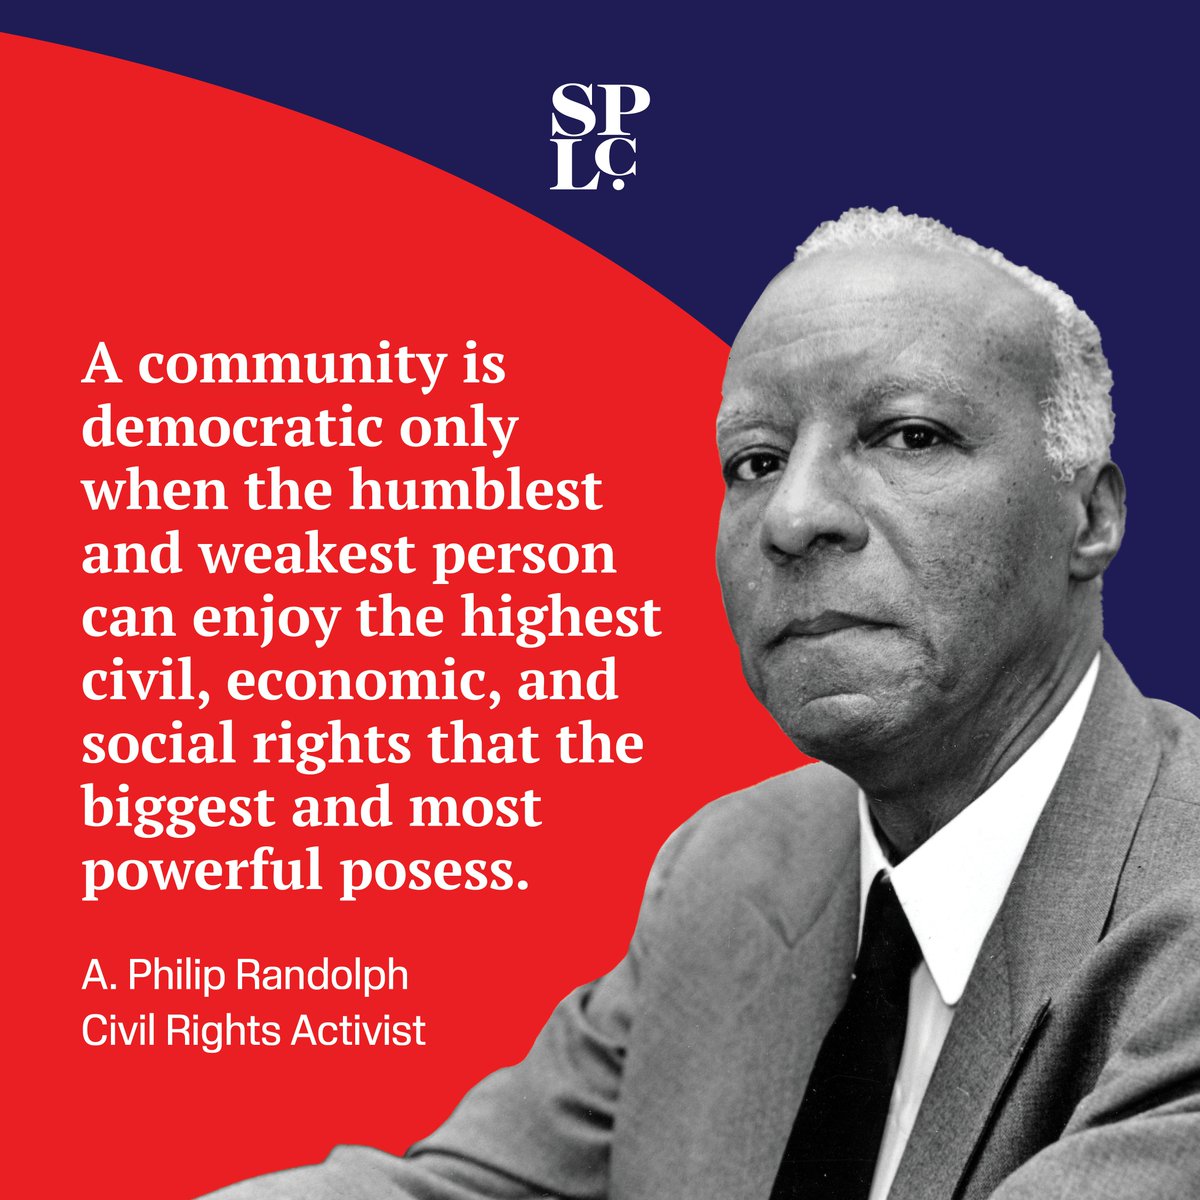 #OTD in 1889, A. Philip Randolph was born. He organized the March on Washington, where Martin Luther King Jr. gave his famous 'I Have a Dream' speech. He was a civil rights activist, a labor organizer and instrumental to desegregating the military. #TheMarchContinues